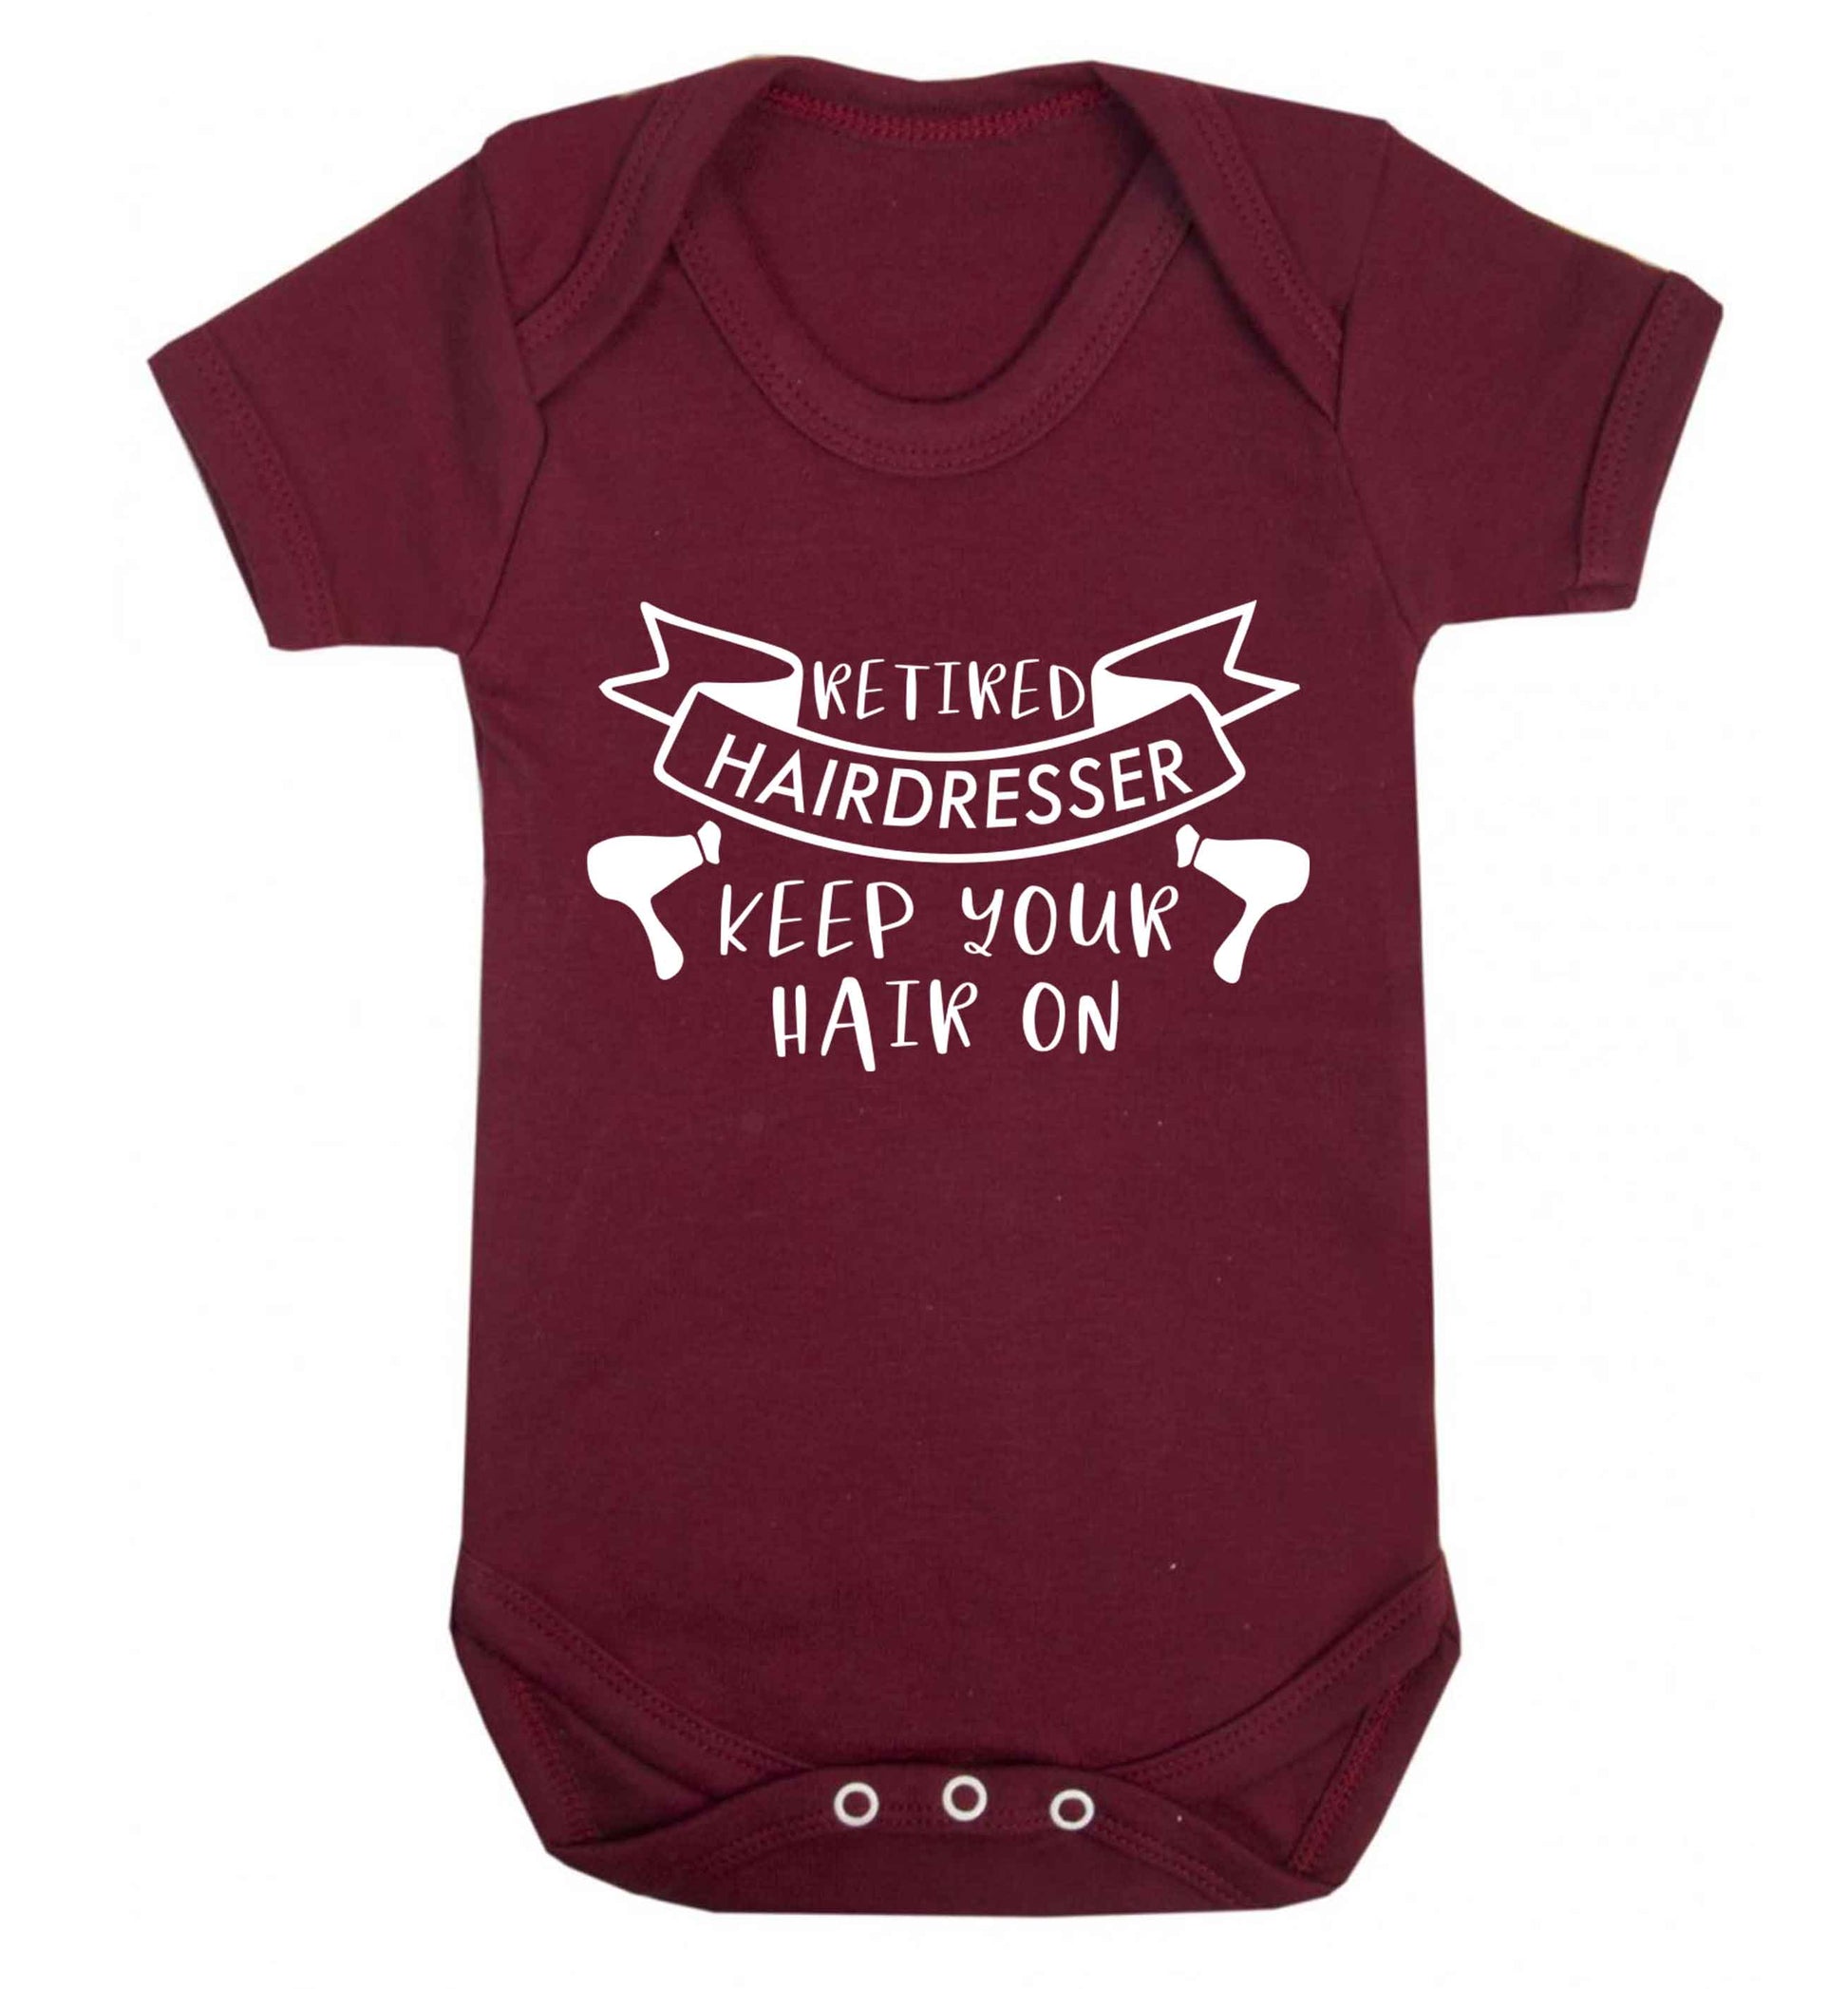 Retired hairdresser keep your hair on Baby Vest maroon 18-24 months